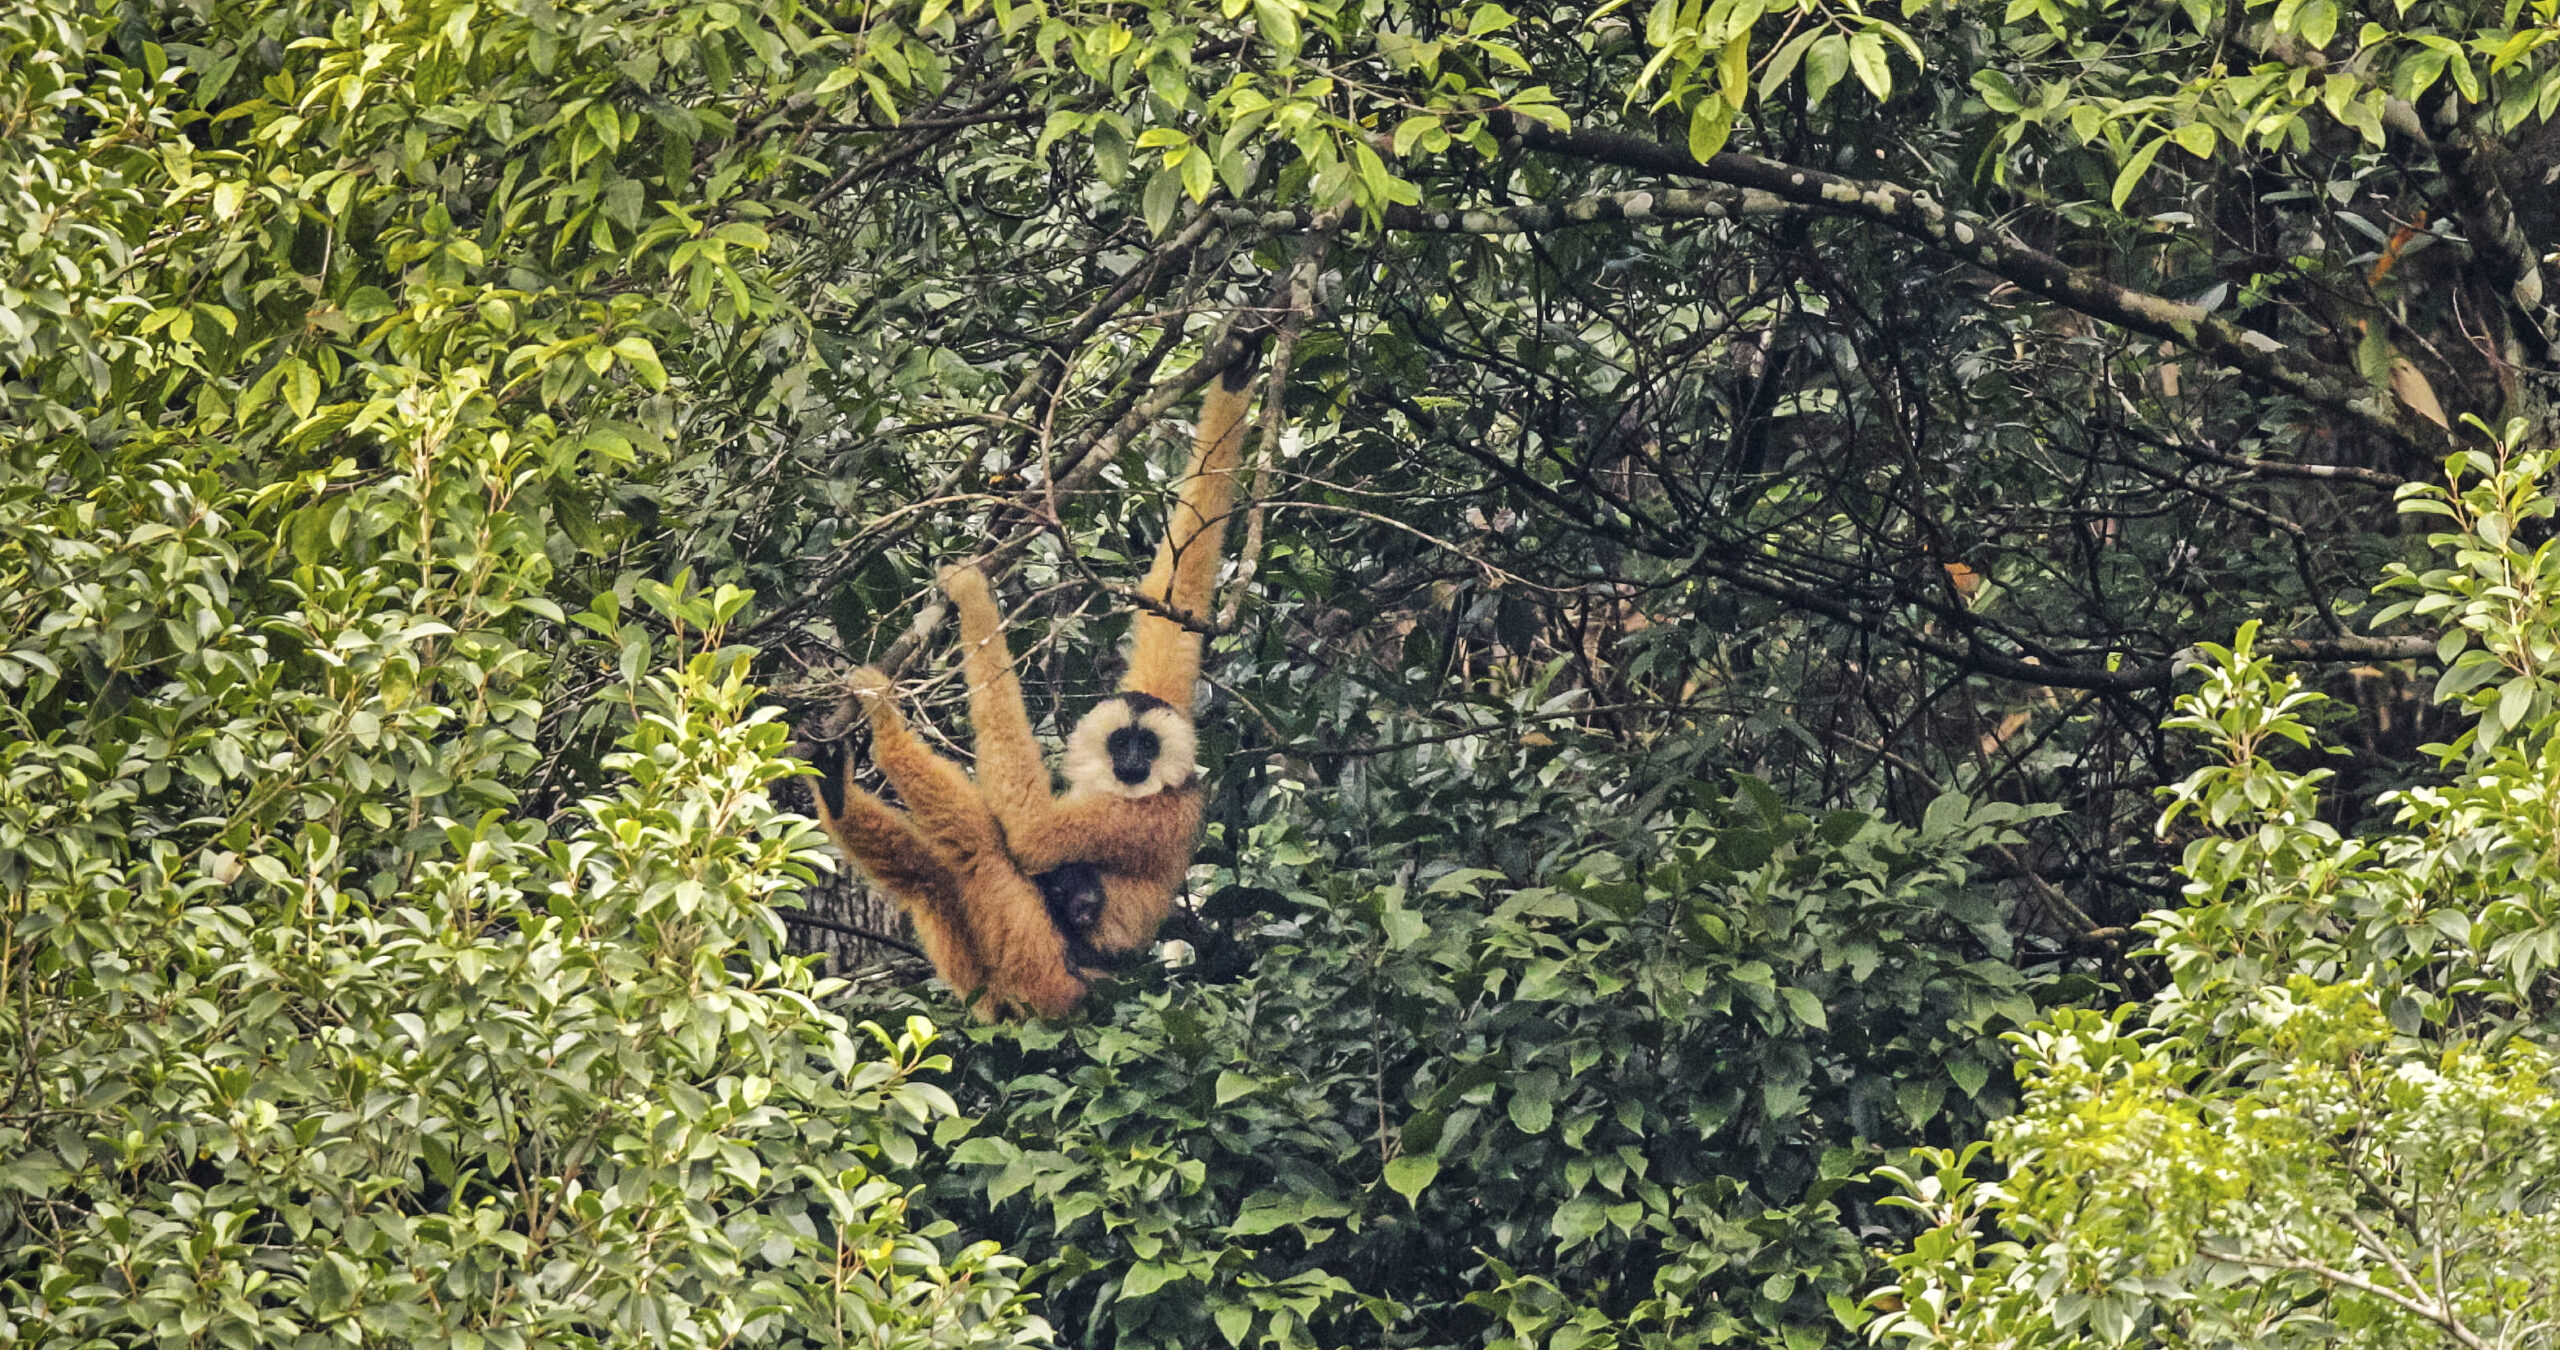 World’s Second Rarest Primate Caught On Film Playing In The Trees